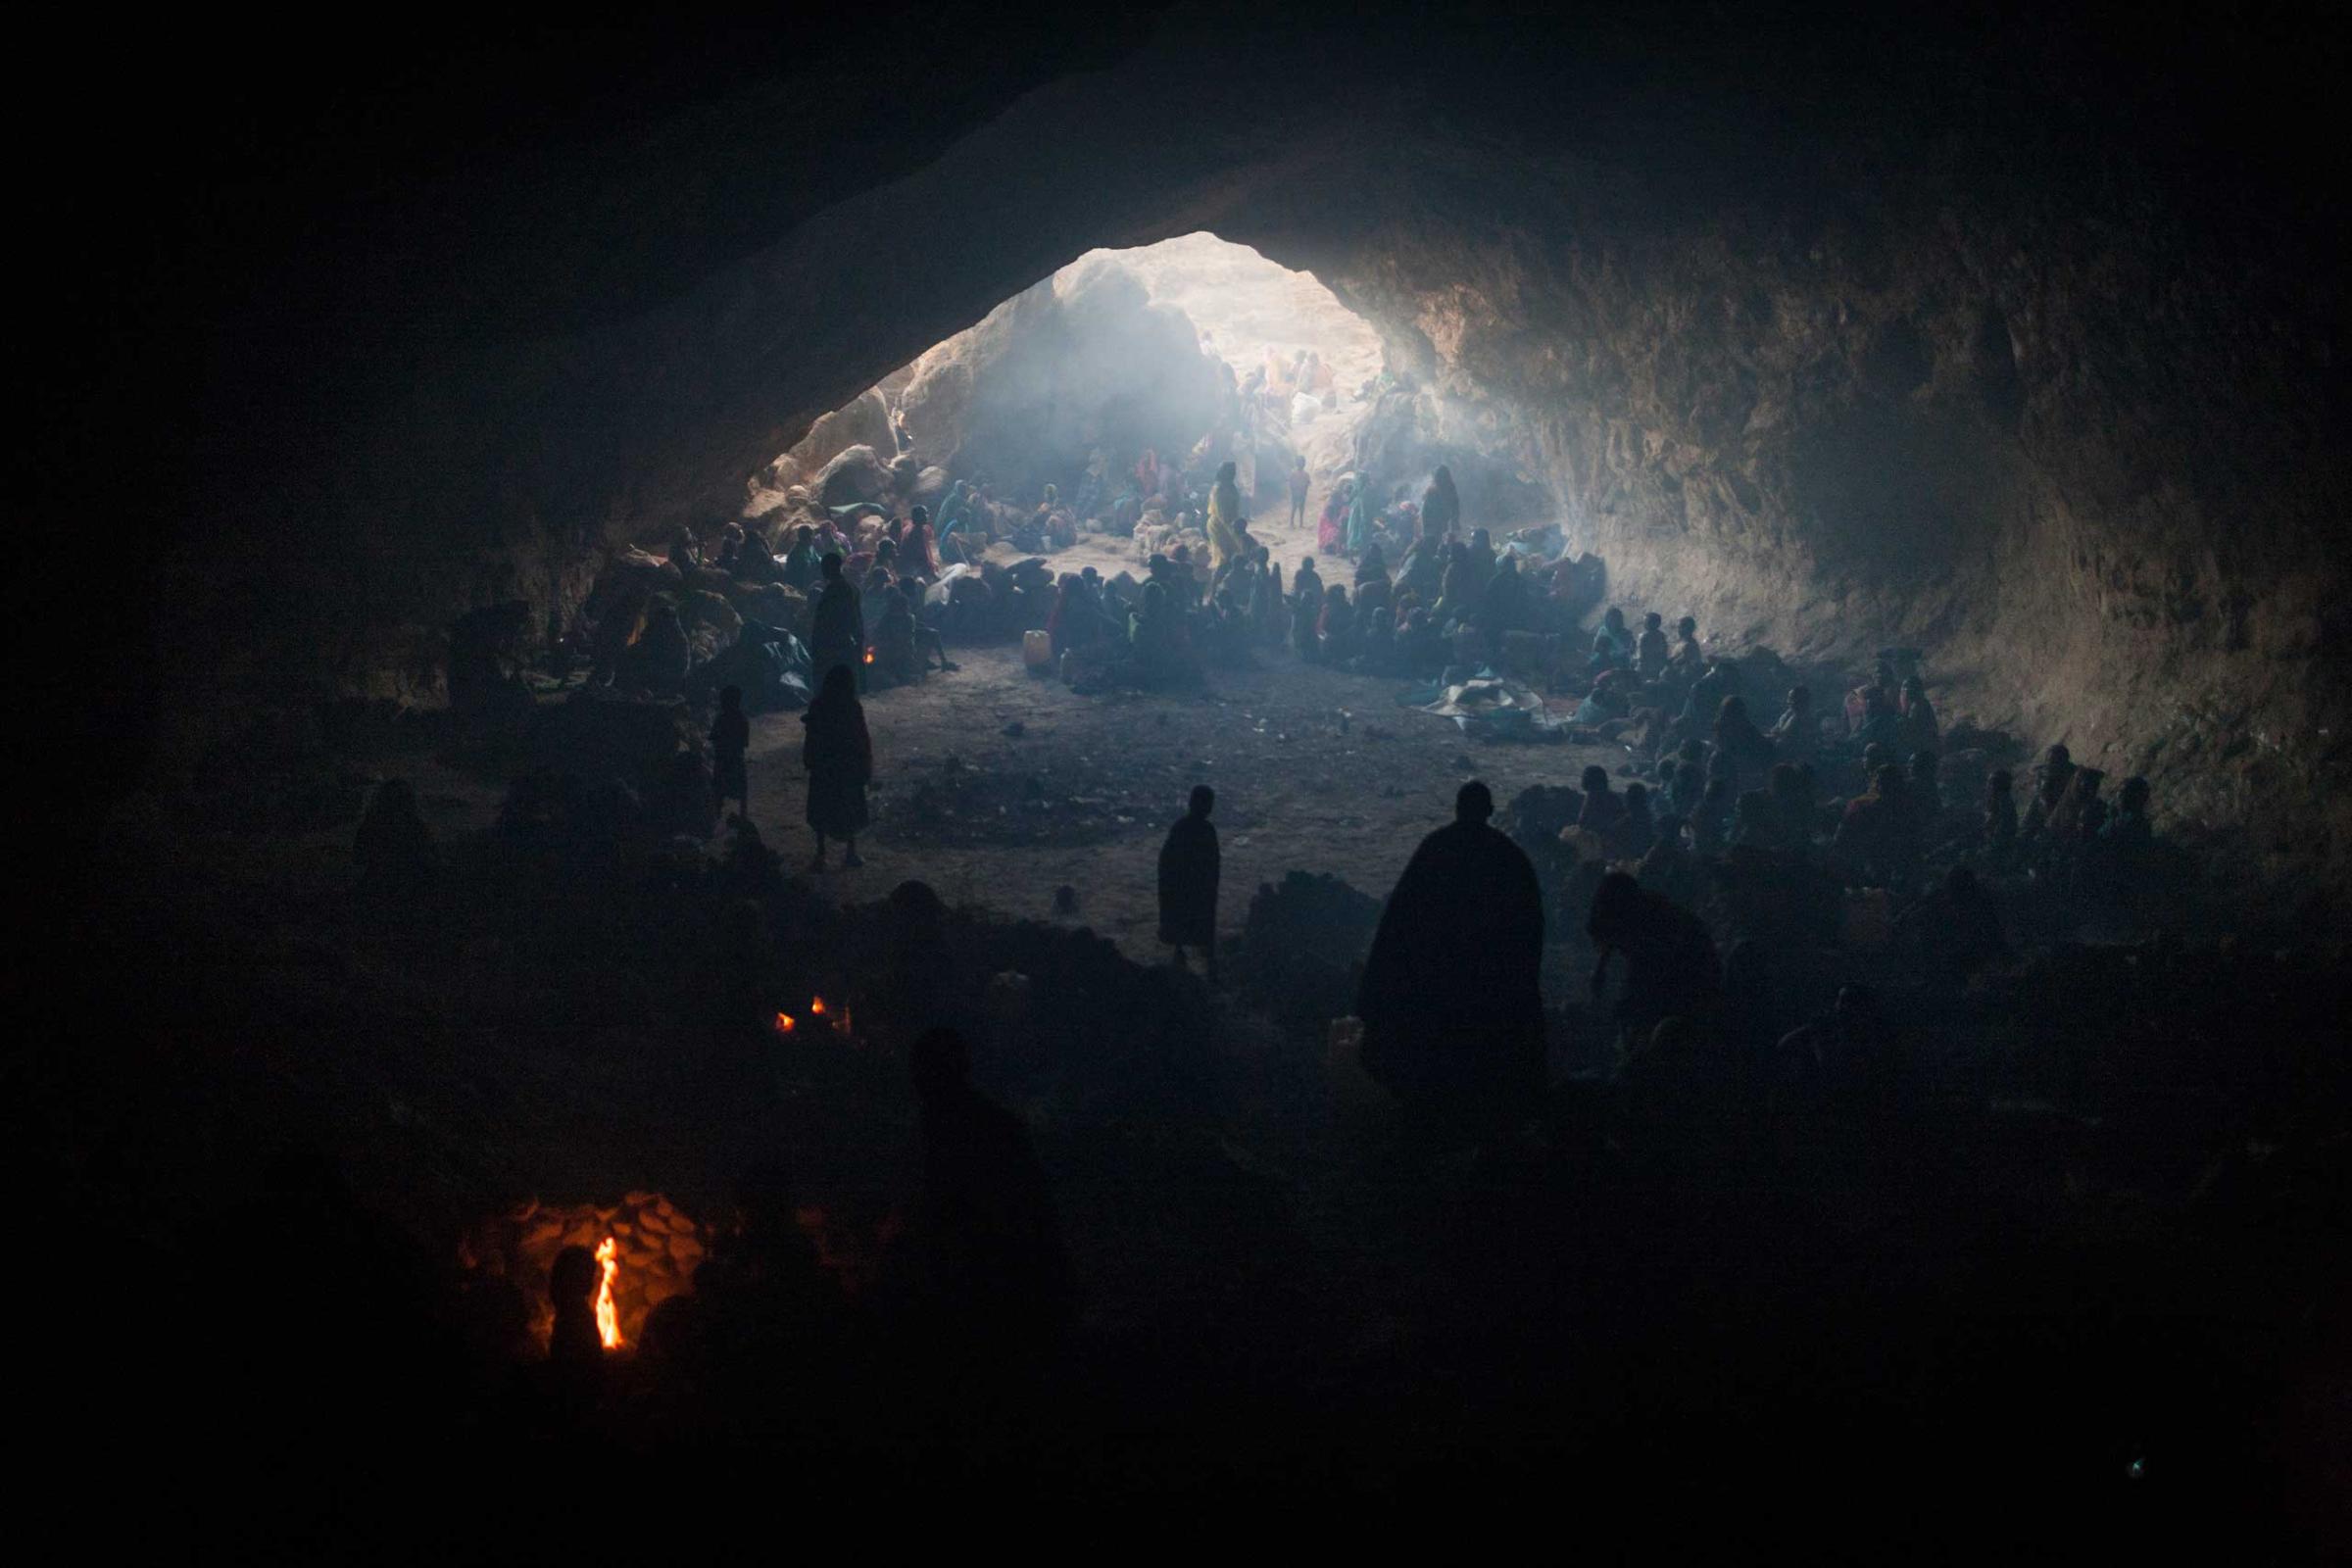 HundreHundreds of women and children seek shelter in a cave from the bombing by the Sudanese government's forces outside of the town of Sarong in Central Darfur, Sudan, March 2, 2015. Human rights groups estimate that over 100,000 people have been displaced in Darfur in the first few months of 2015. ds of women and children seek shelter in a cave from the bombing by the Sudanese government's forces outside of the town of Sarong in Central Darfur, Sudan on March 2, 2015.